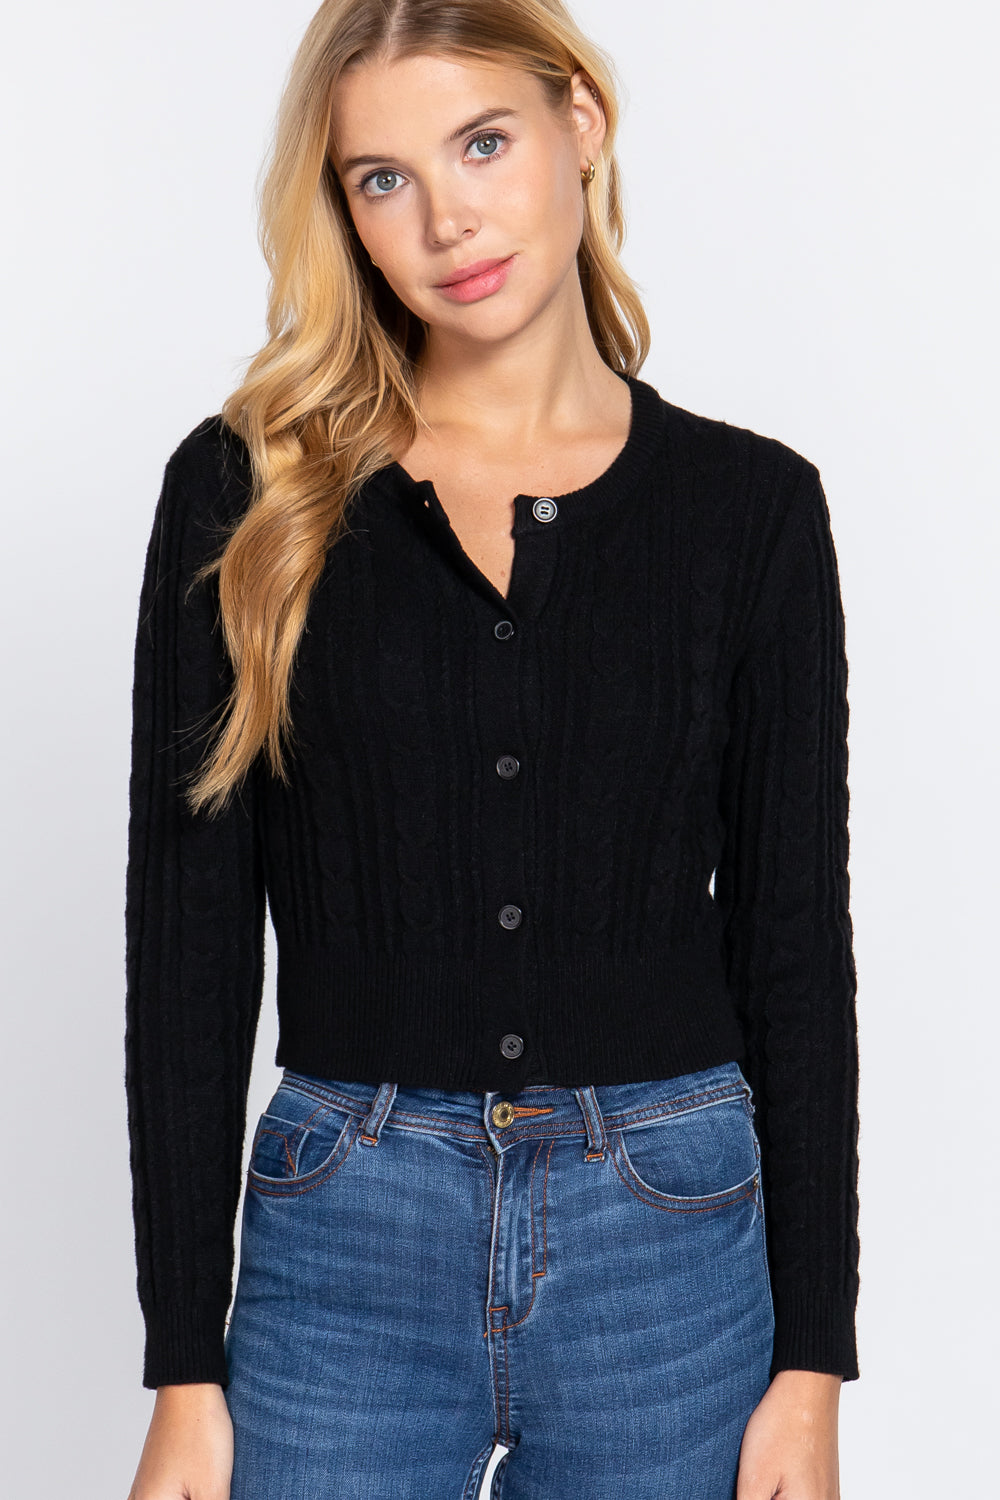 - Crew Neck Cable Sweater Cardigan - 4 colors - womens cardigan at TFC&H Co.